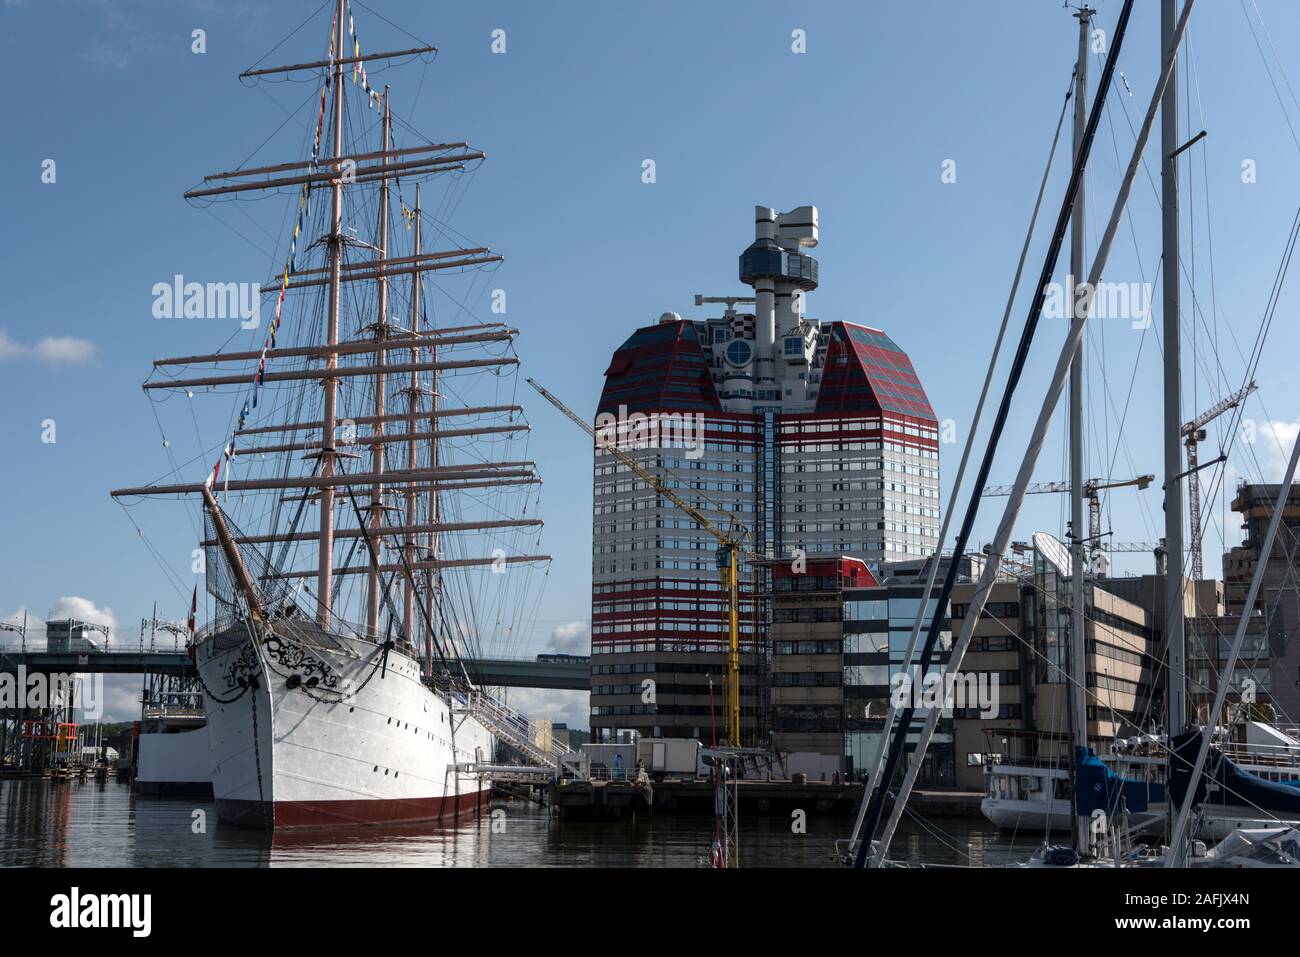 A marina at Lilla Bommen, part of the harbour on the Gota alv river in Gothenburg, second largest city after Stockholm in Sweden.  The four-mast steel Stock Photo